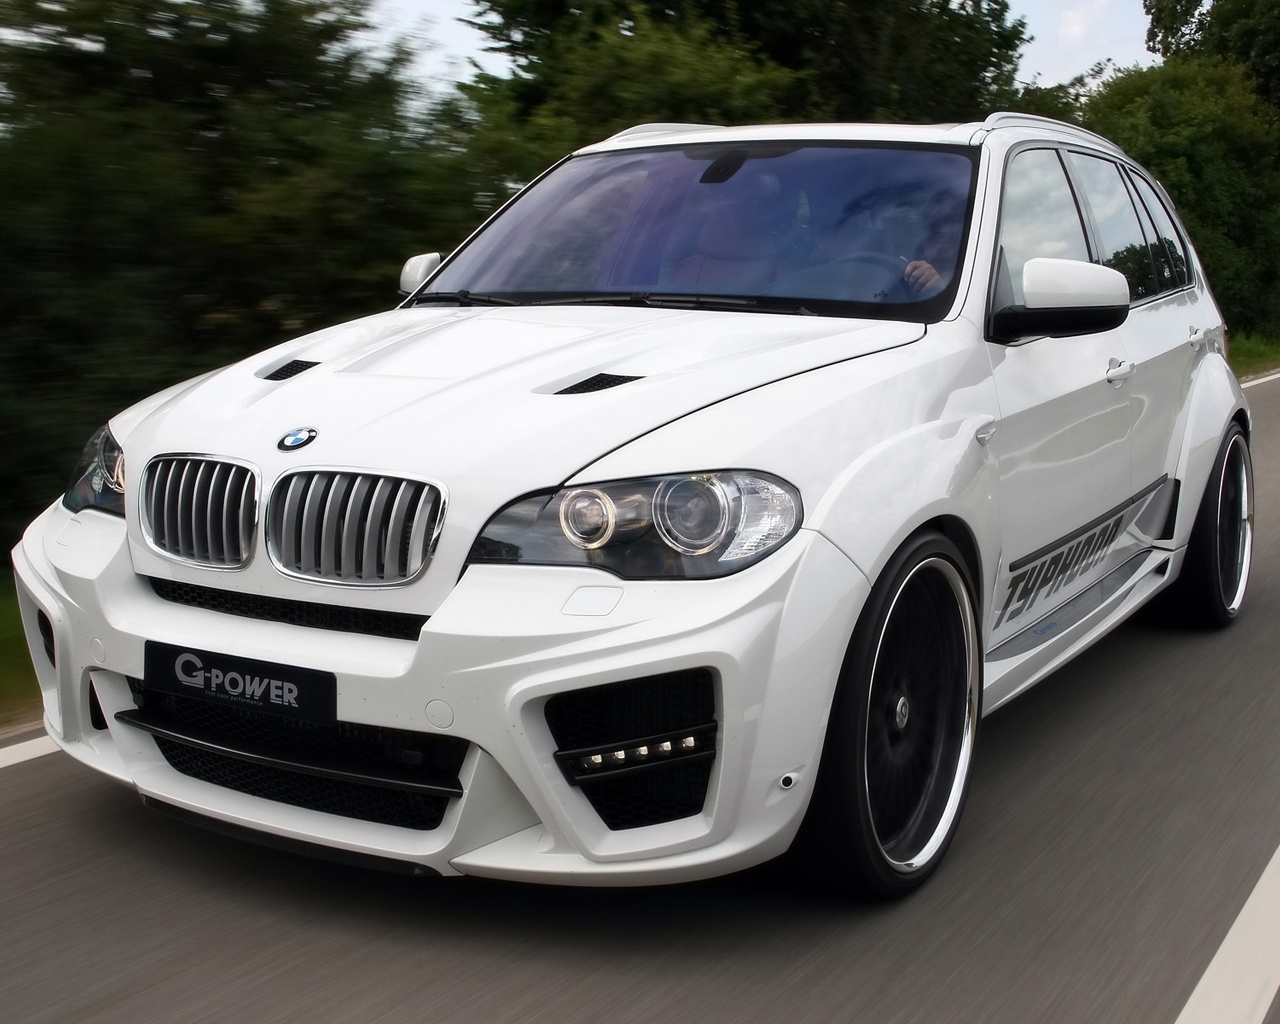 BMW X5 Typhoon RS 2010 G Power for 1280 x 1024 resolution